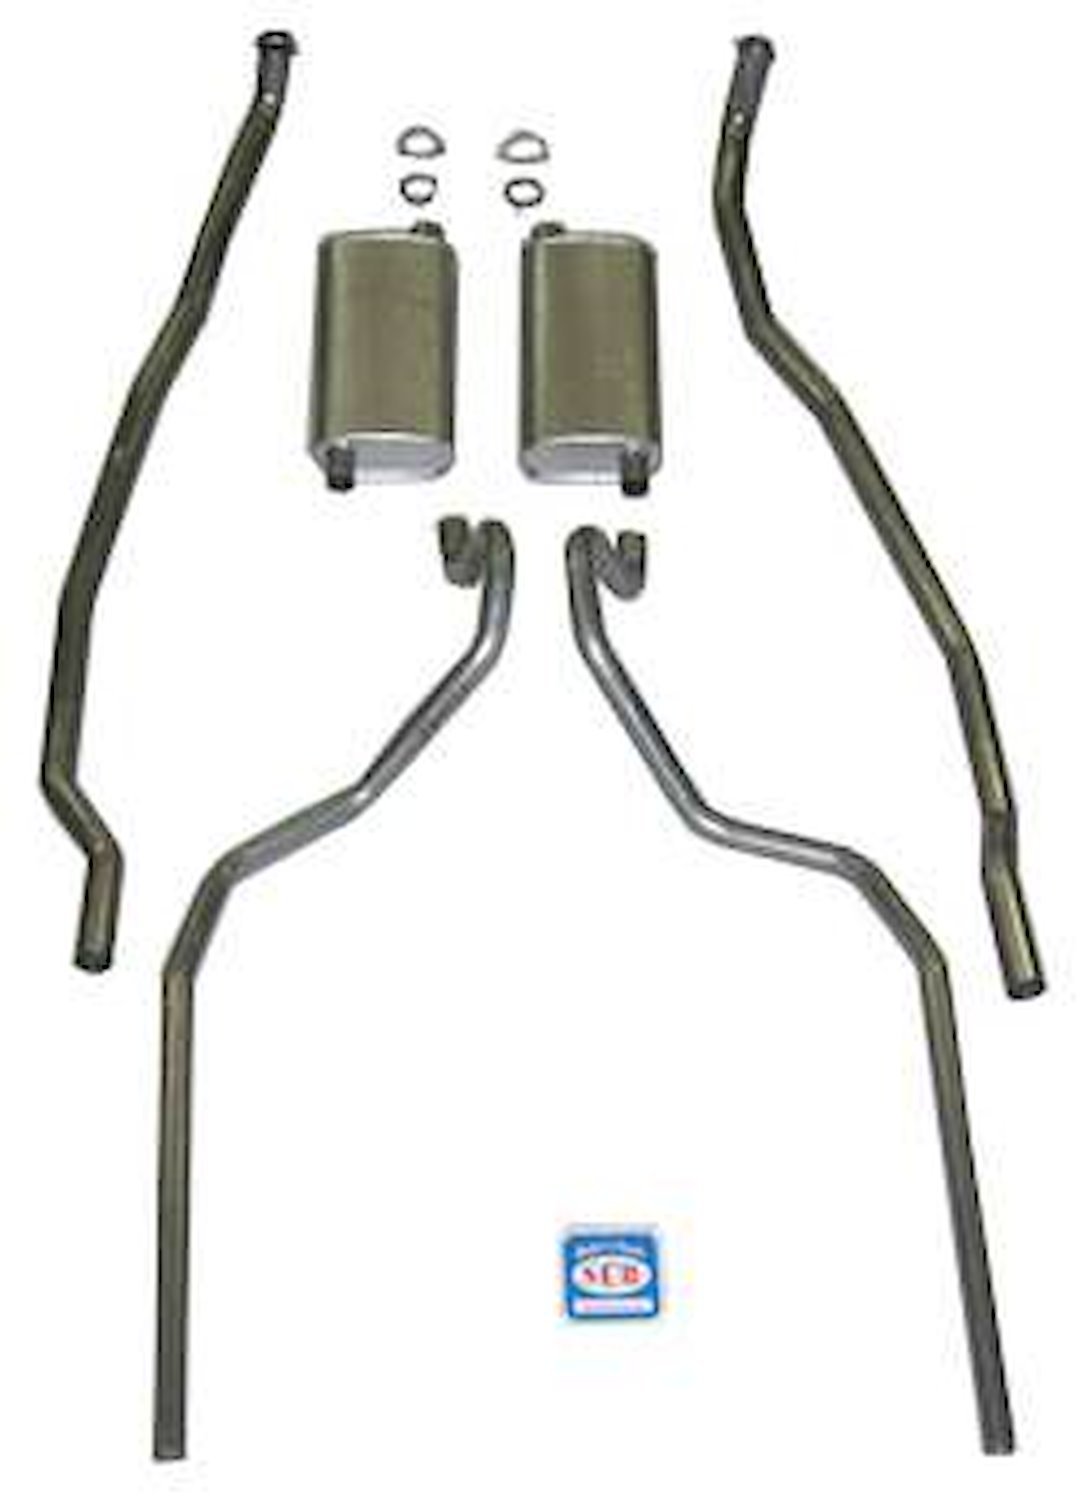 73068S 1965-66 Chevrolet Full-Size Exhaust System 8-cyl 396 & 427 Dual, 304 Stainless Steel